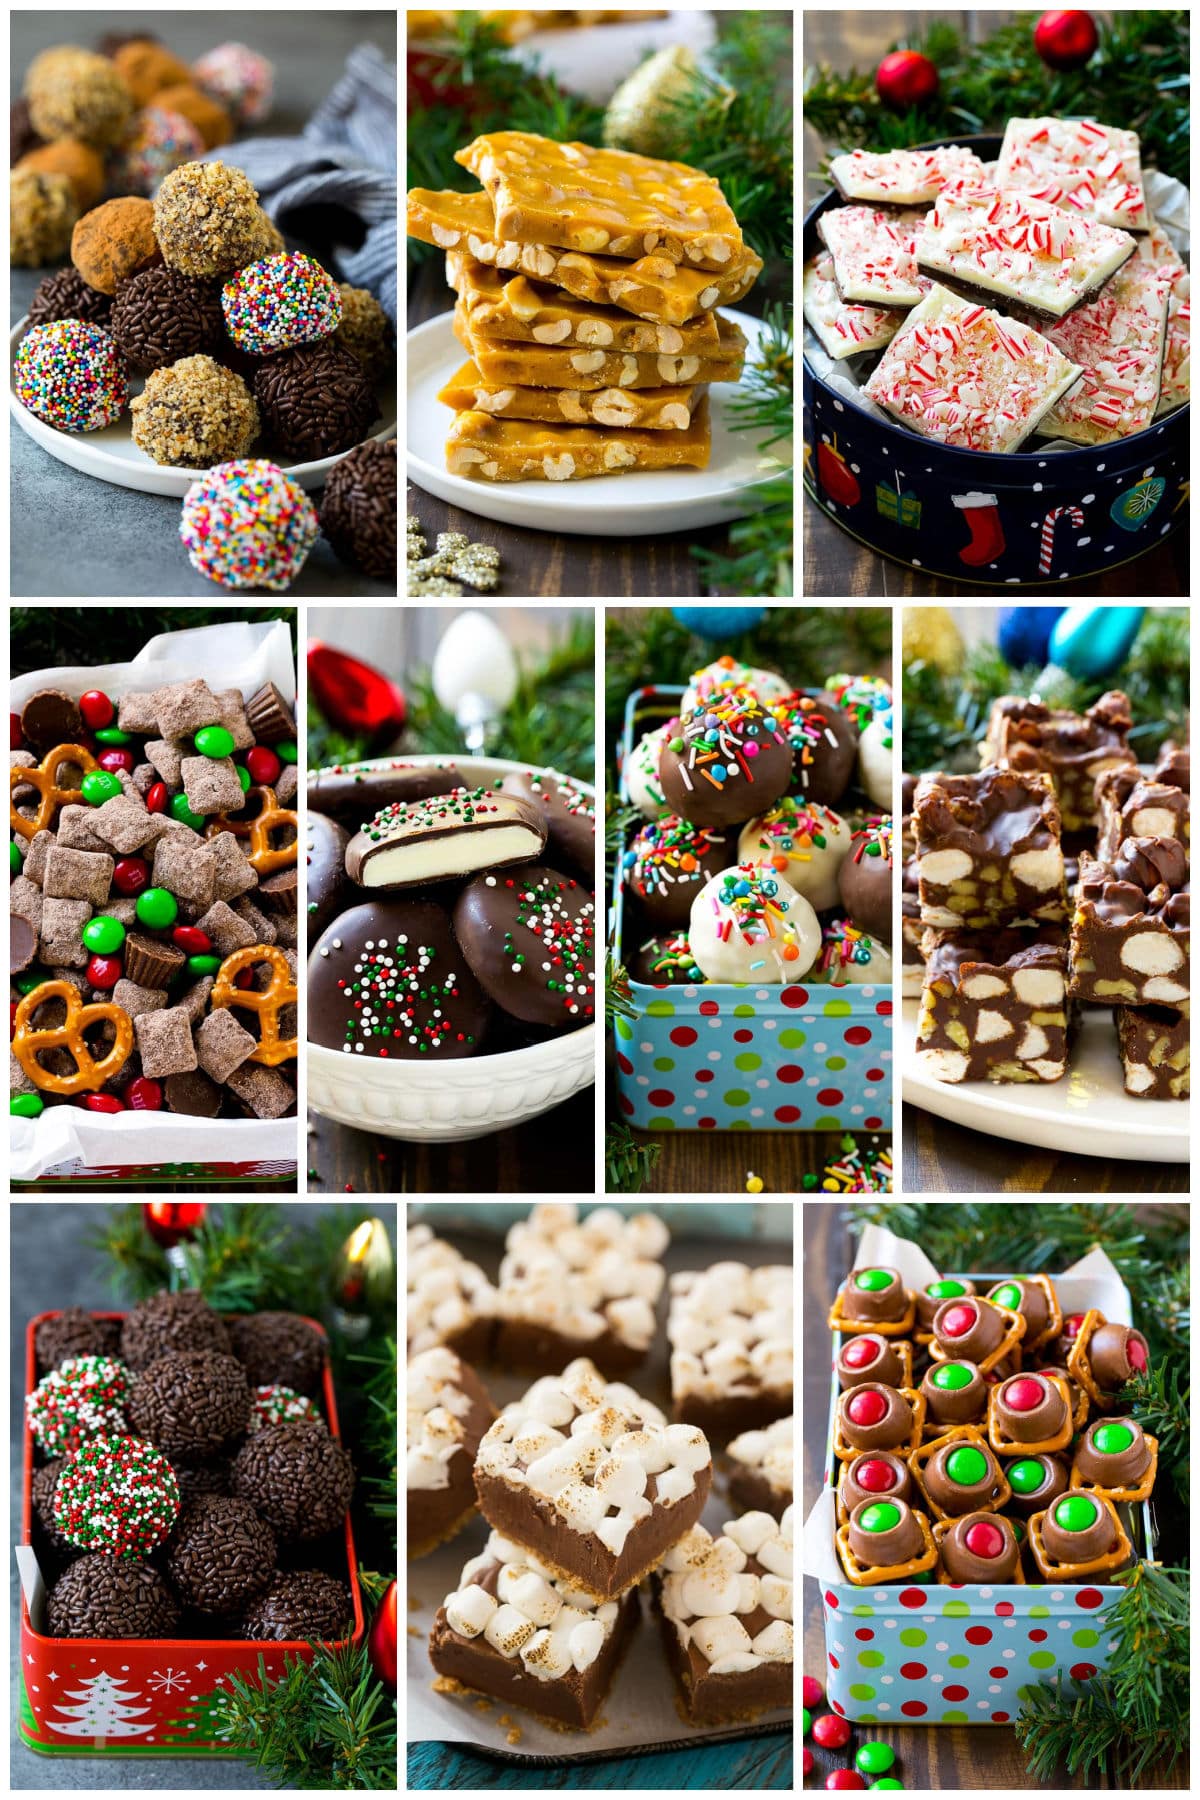 A collection of holiday treats like peppermint patties, rocky road fudge and reindeer chow.